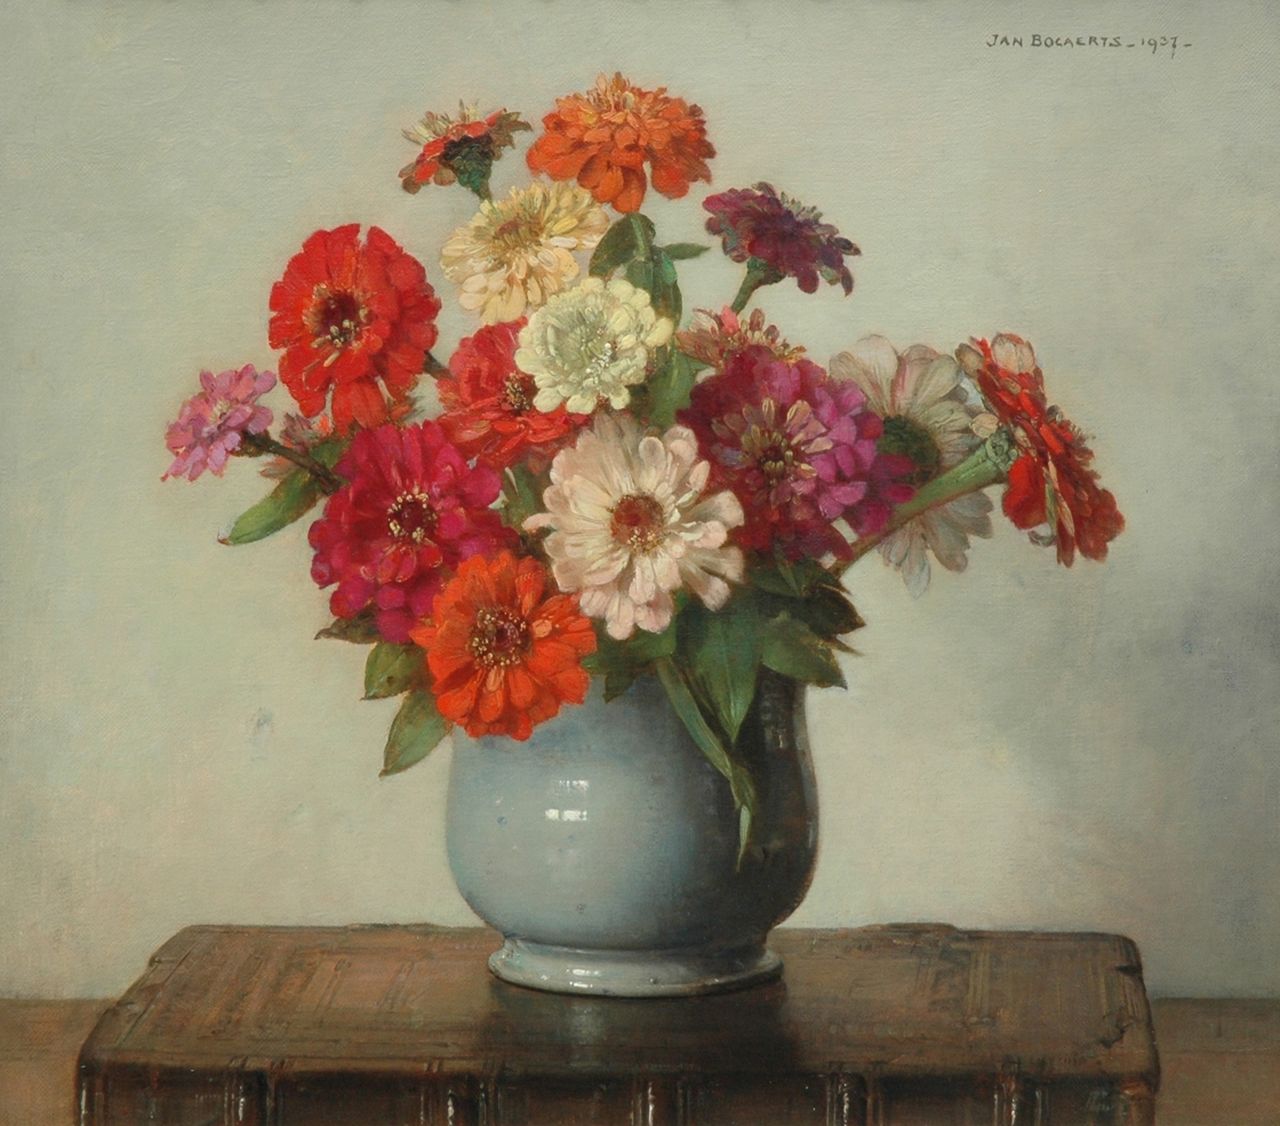 Bogaerts J.J.M.  | Johannes Jacobus Maria 'Jan' Bogaerts, Zinnia in a glaced pot, oil on canvas 40.4 x 45.3 cm, signed u.l. and painted 1937